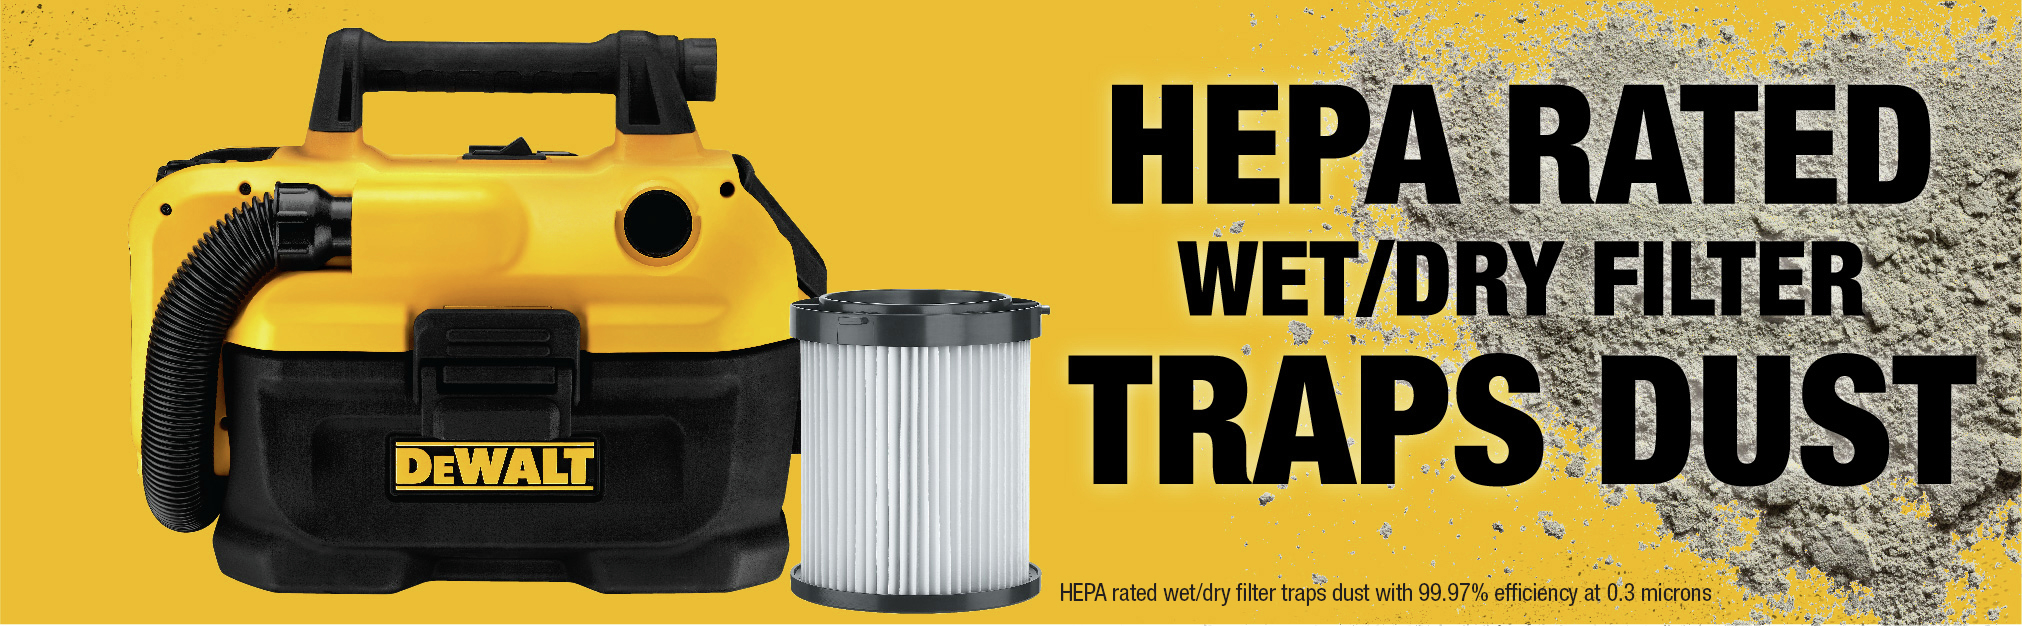 HEPA Rated Wet/Dry Filter Traps Dust